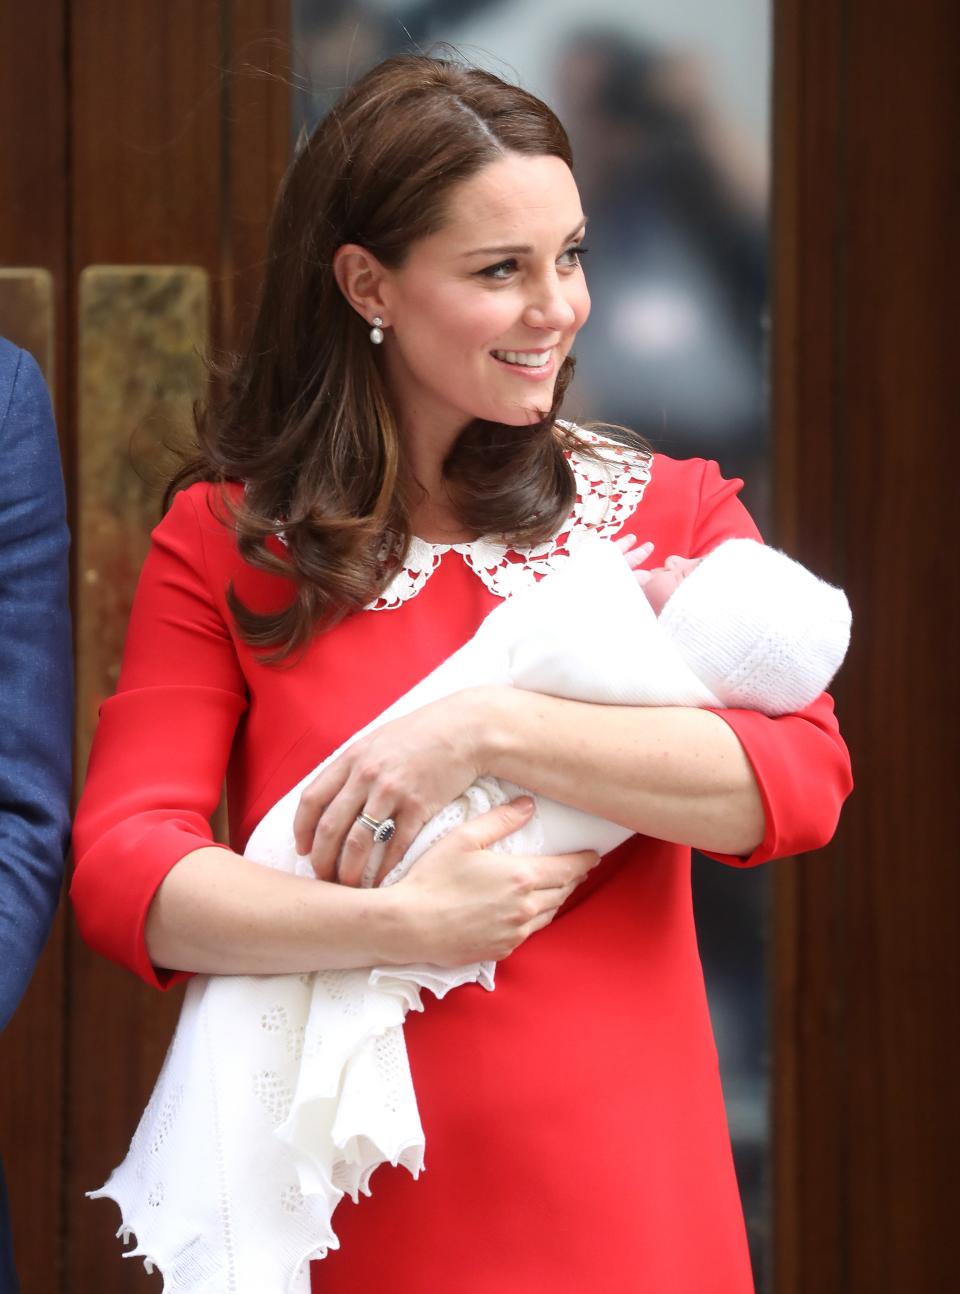 Kate Middleton wore a red Jenny Packham dress for her newborn baby's debut—and it's two nods in one to the late Princess Diana. See the full look here.